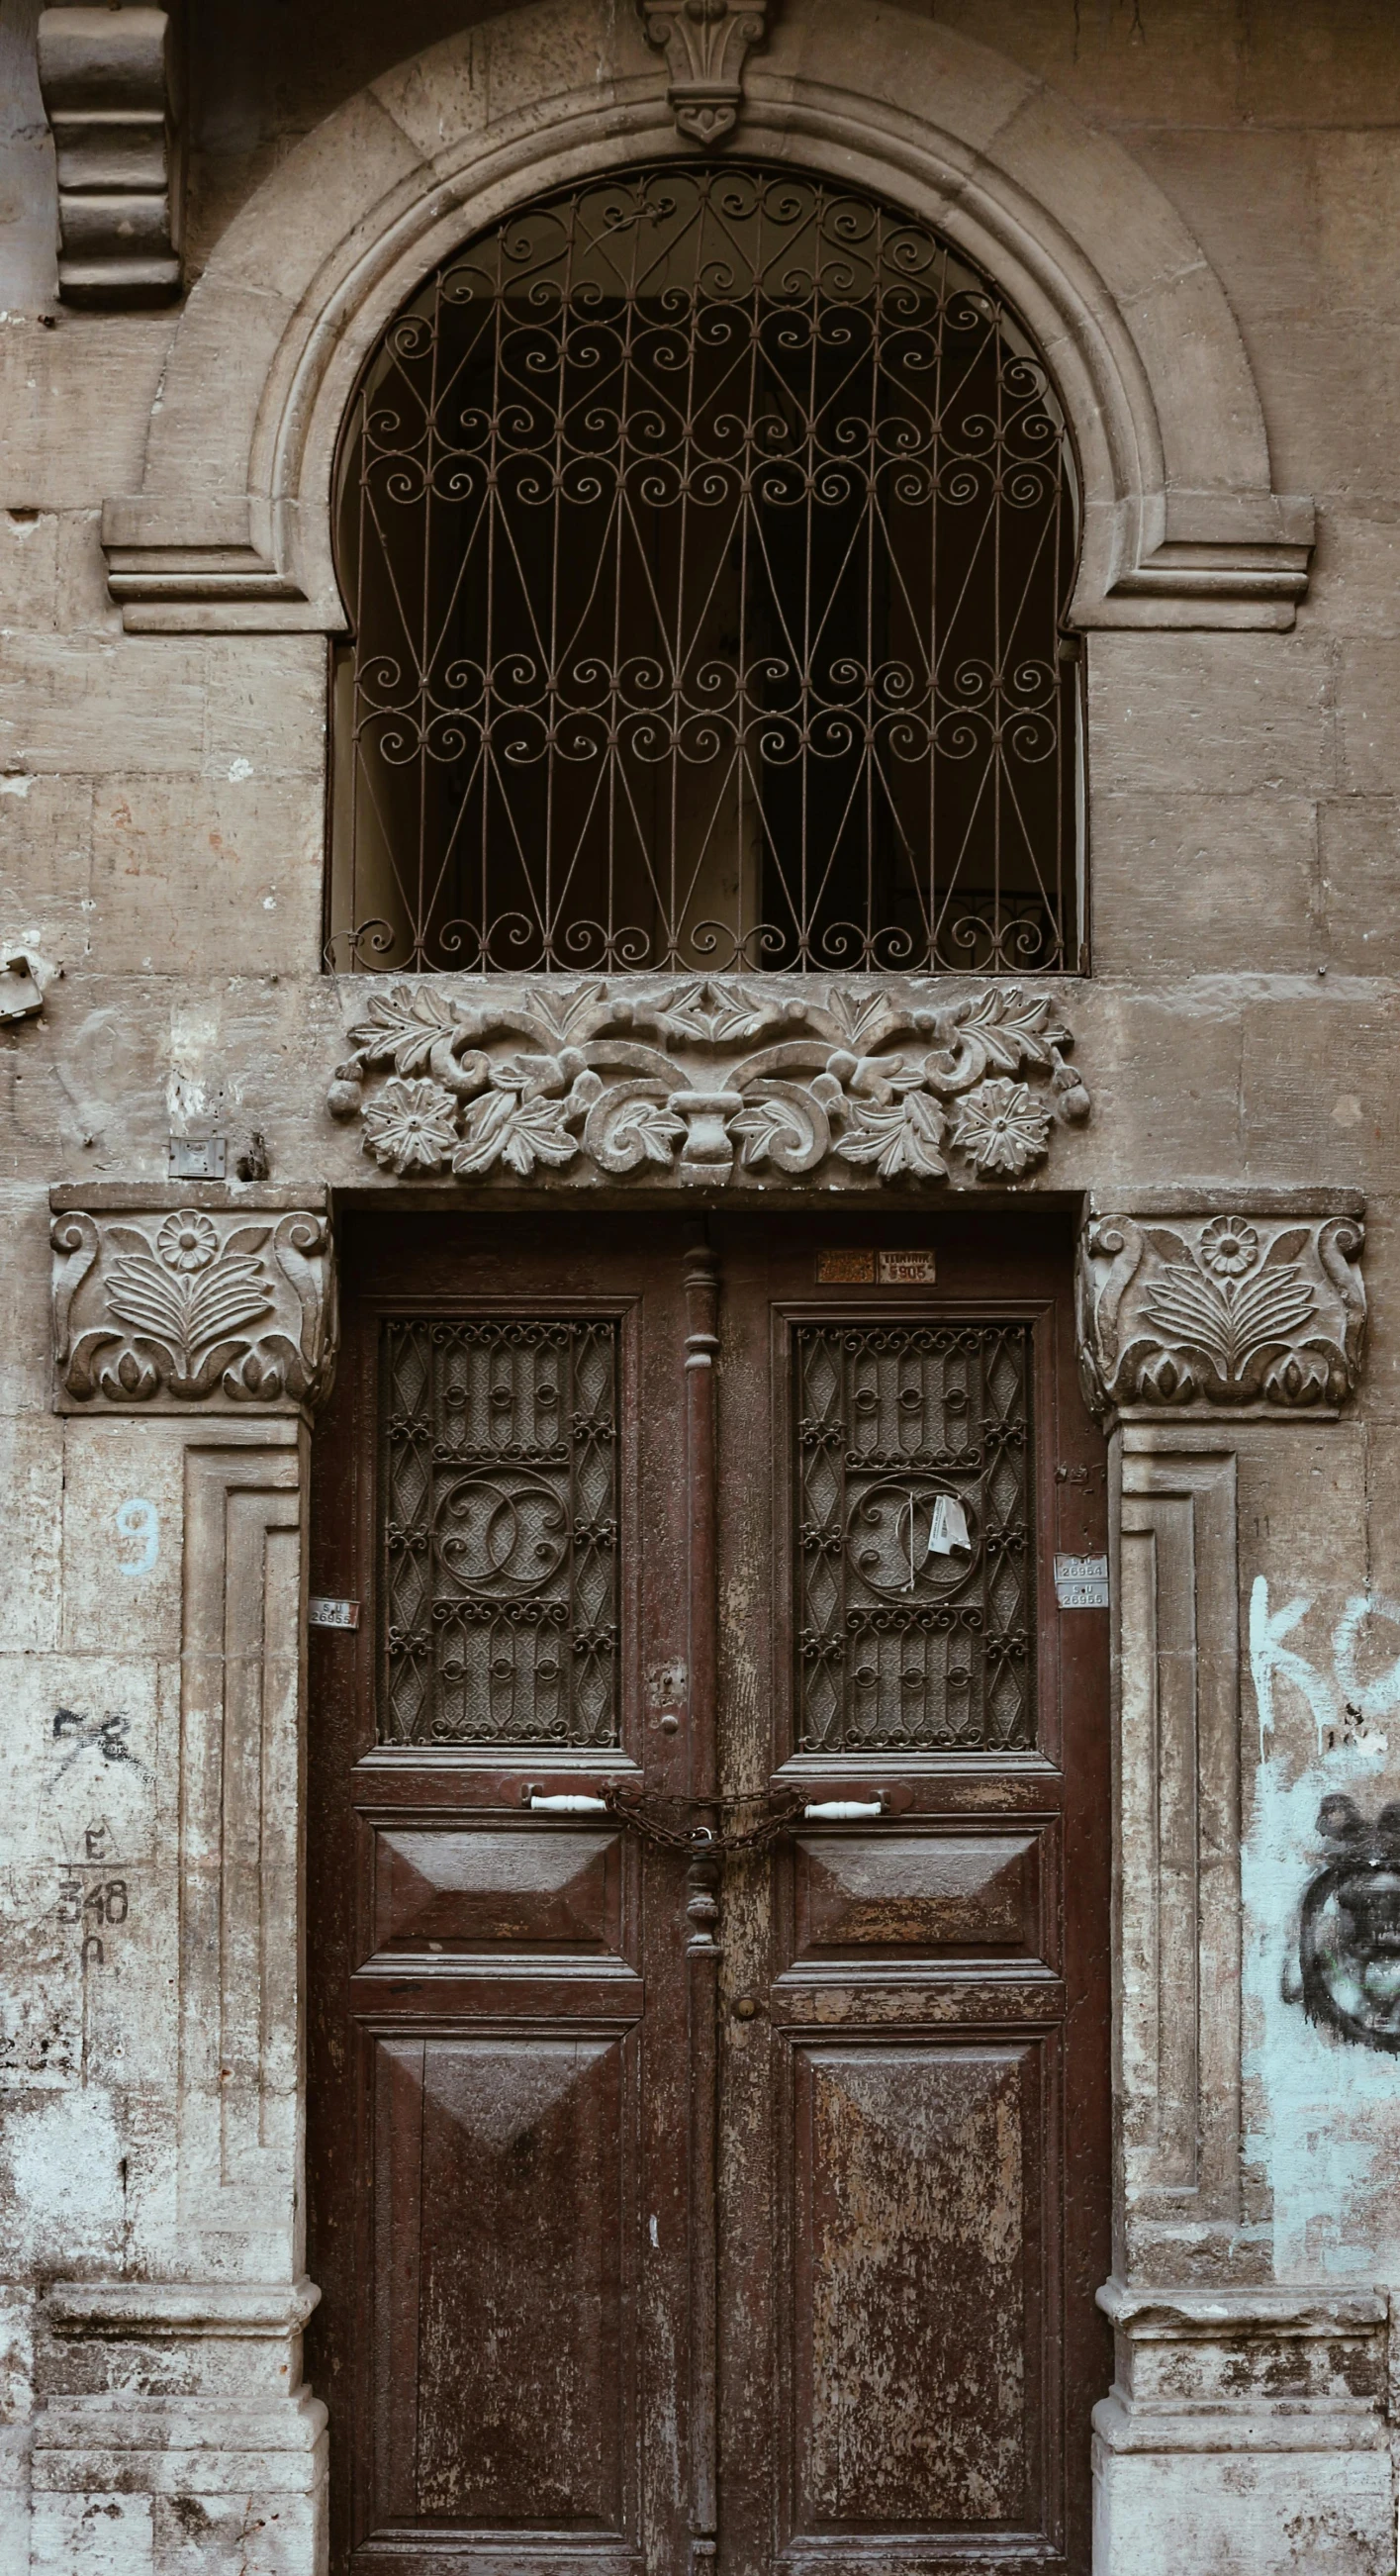 a red fire hydrant sitting in front of a wooden door, pexels contest winner, art nouveau, symmetrical doorway, antoni tapies and cy twombly, brown:-2, old building